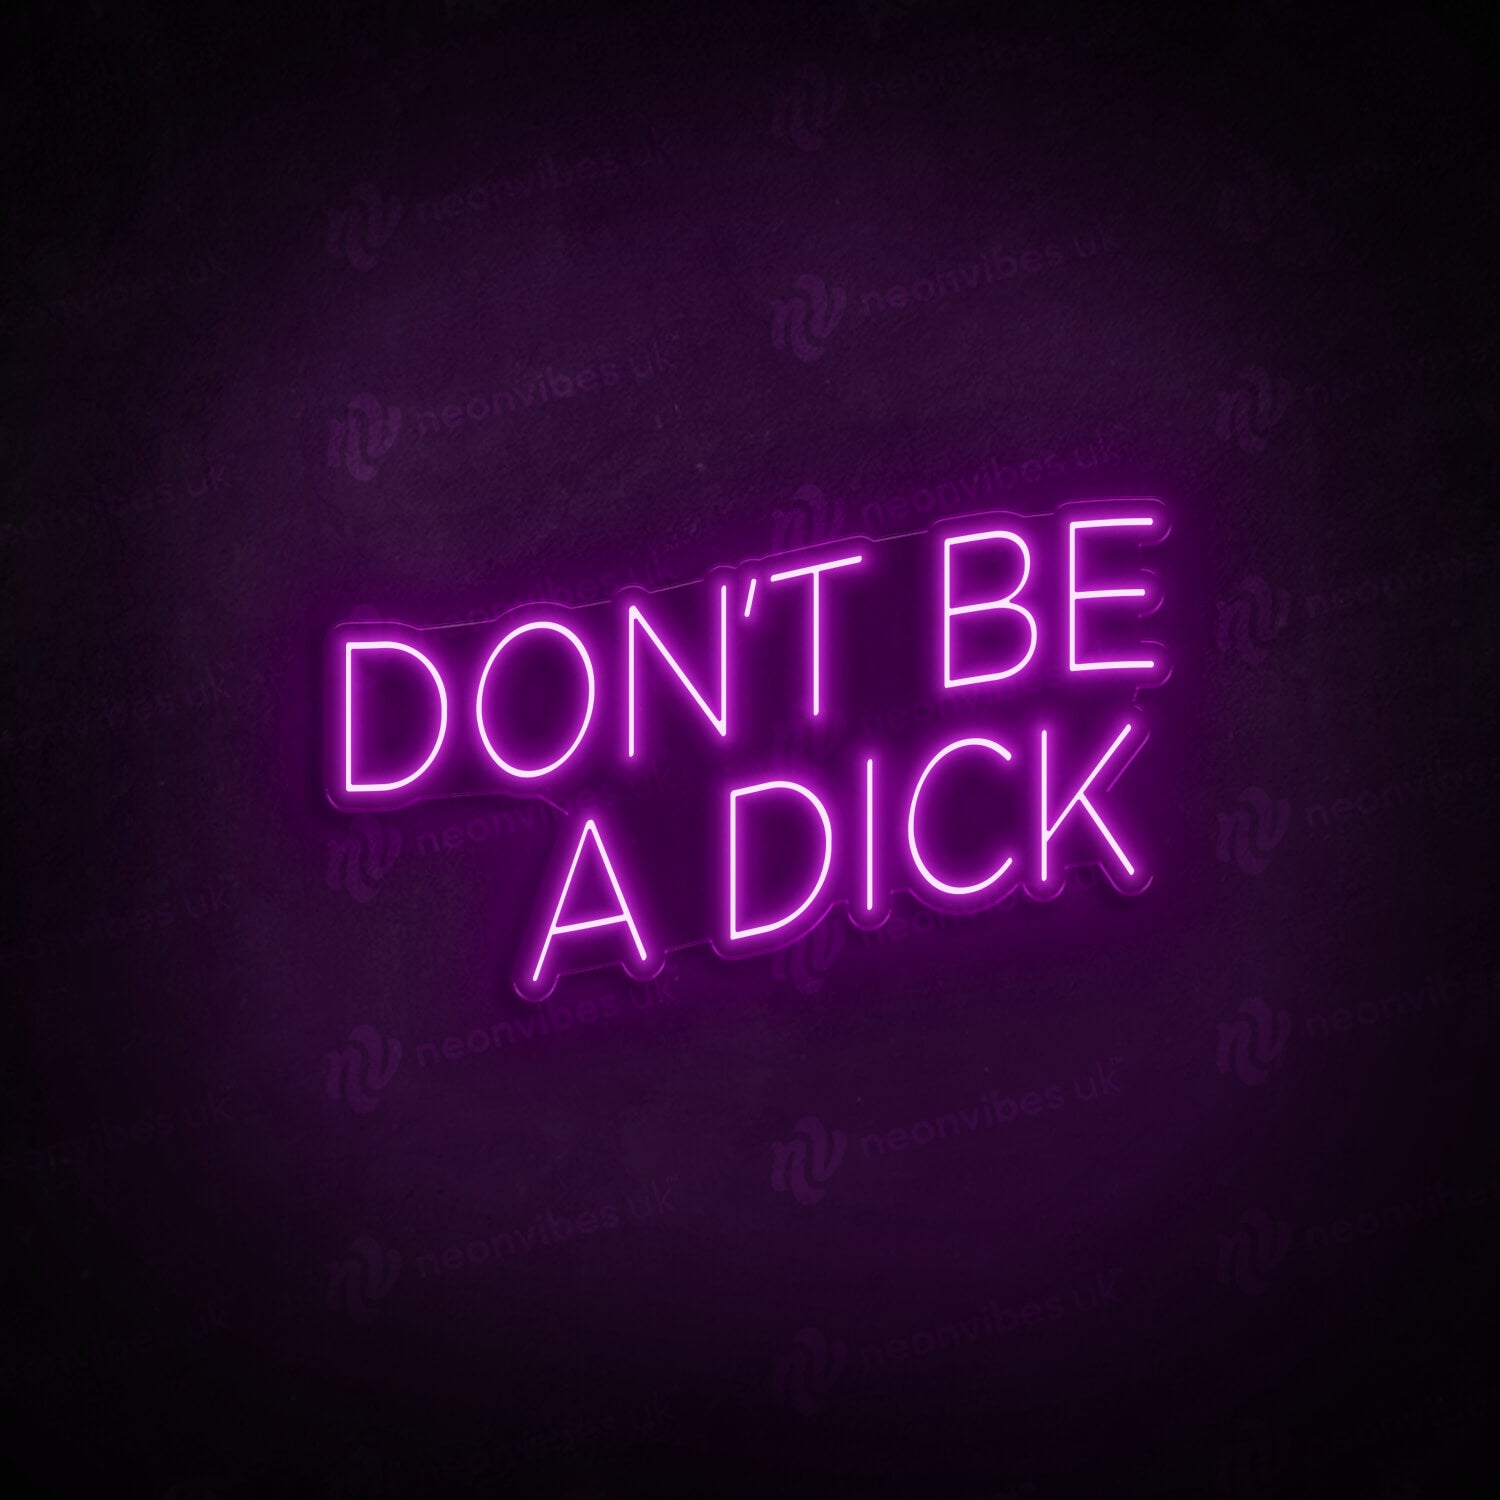 Don't be a dick neon sign